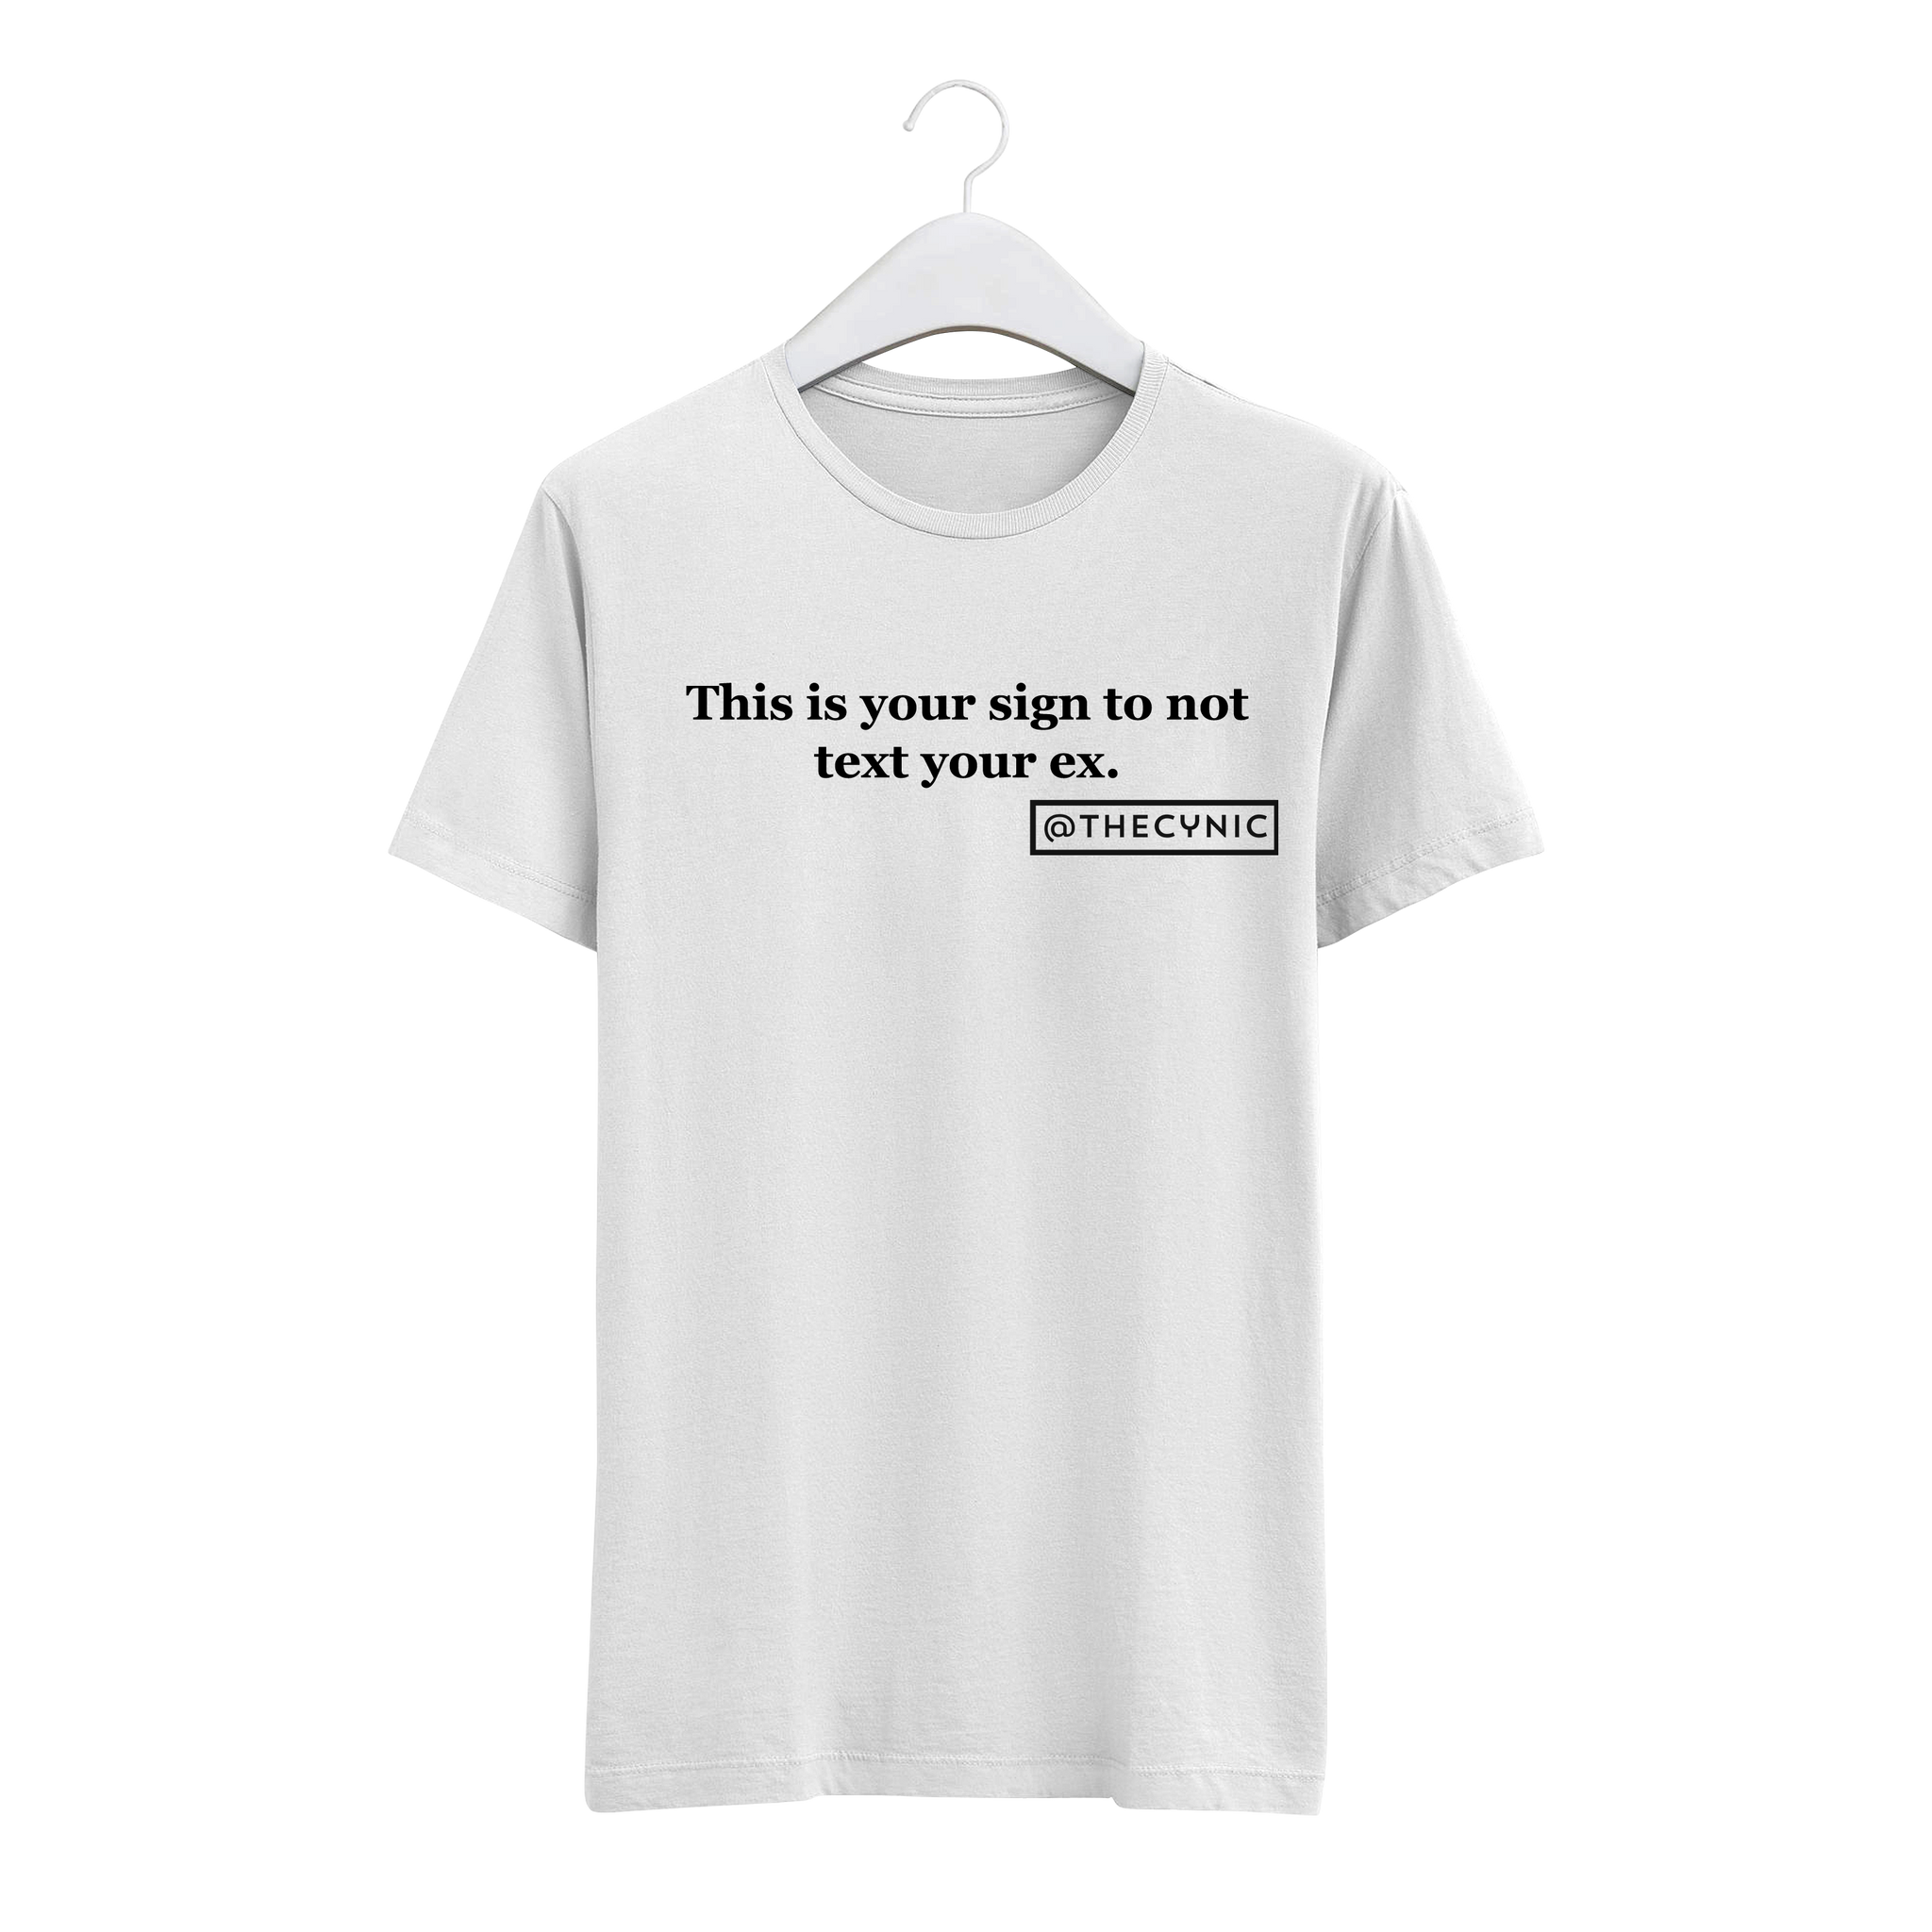 This is your sign to not text your ex. - Unisex Tee